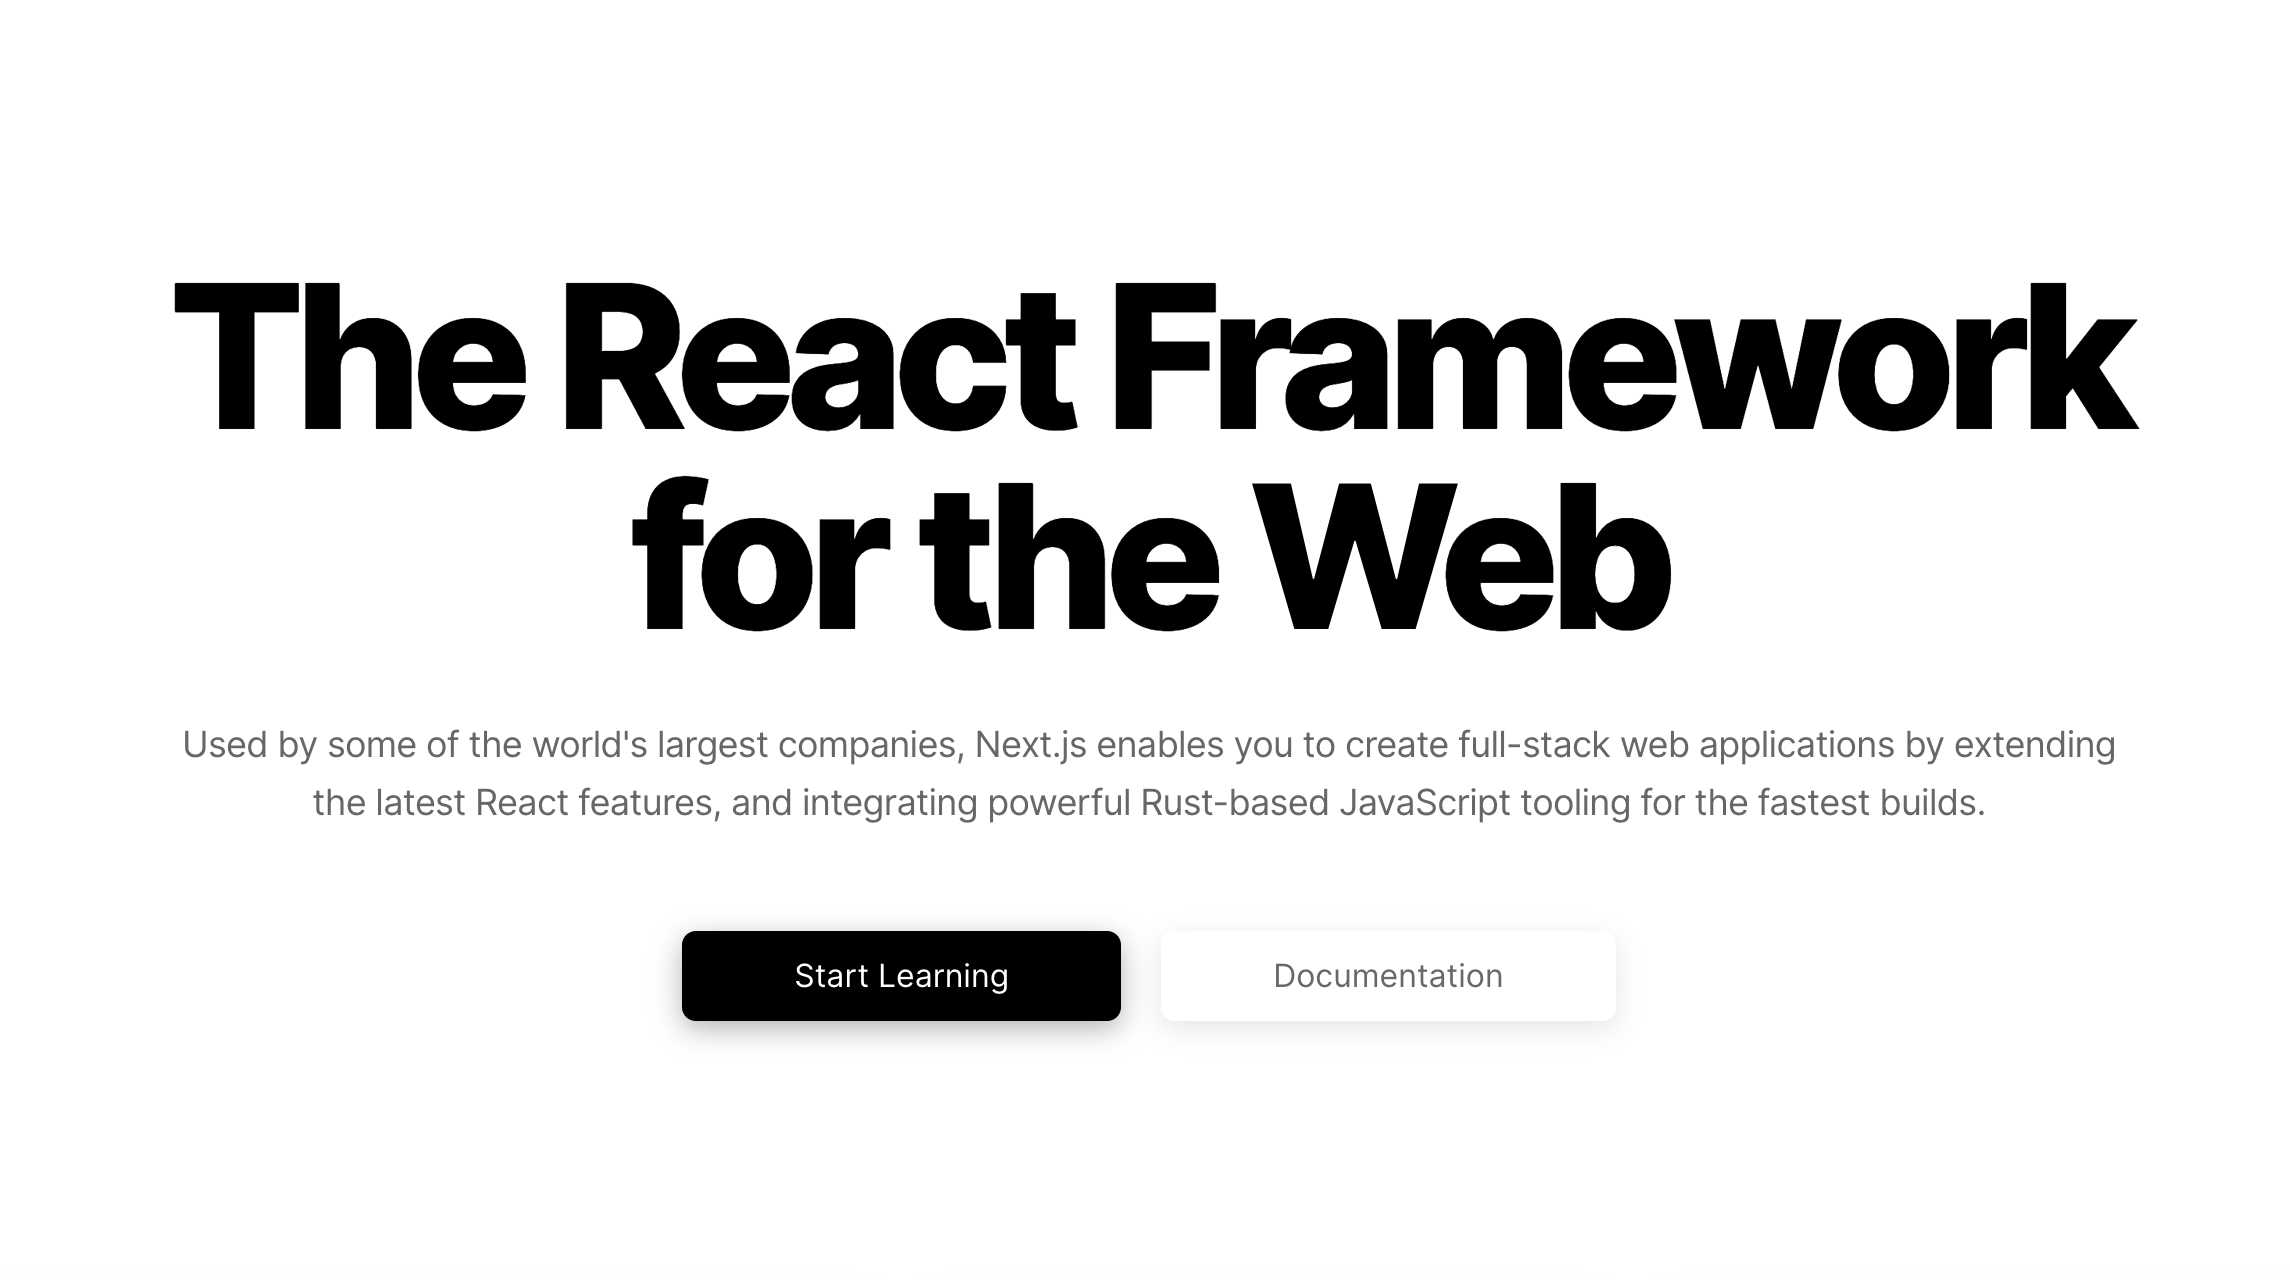 Next.js is the React Framework for the Web